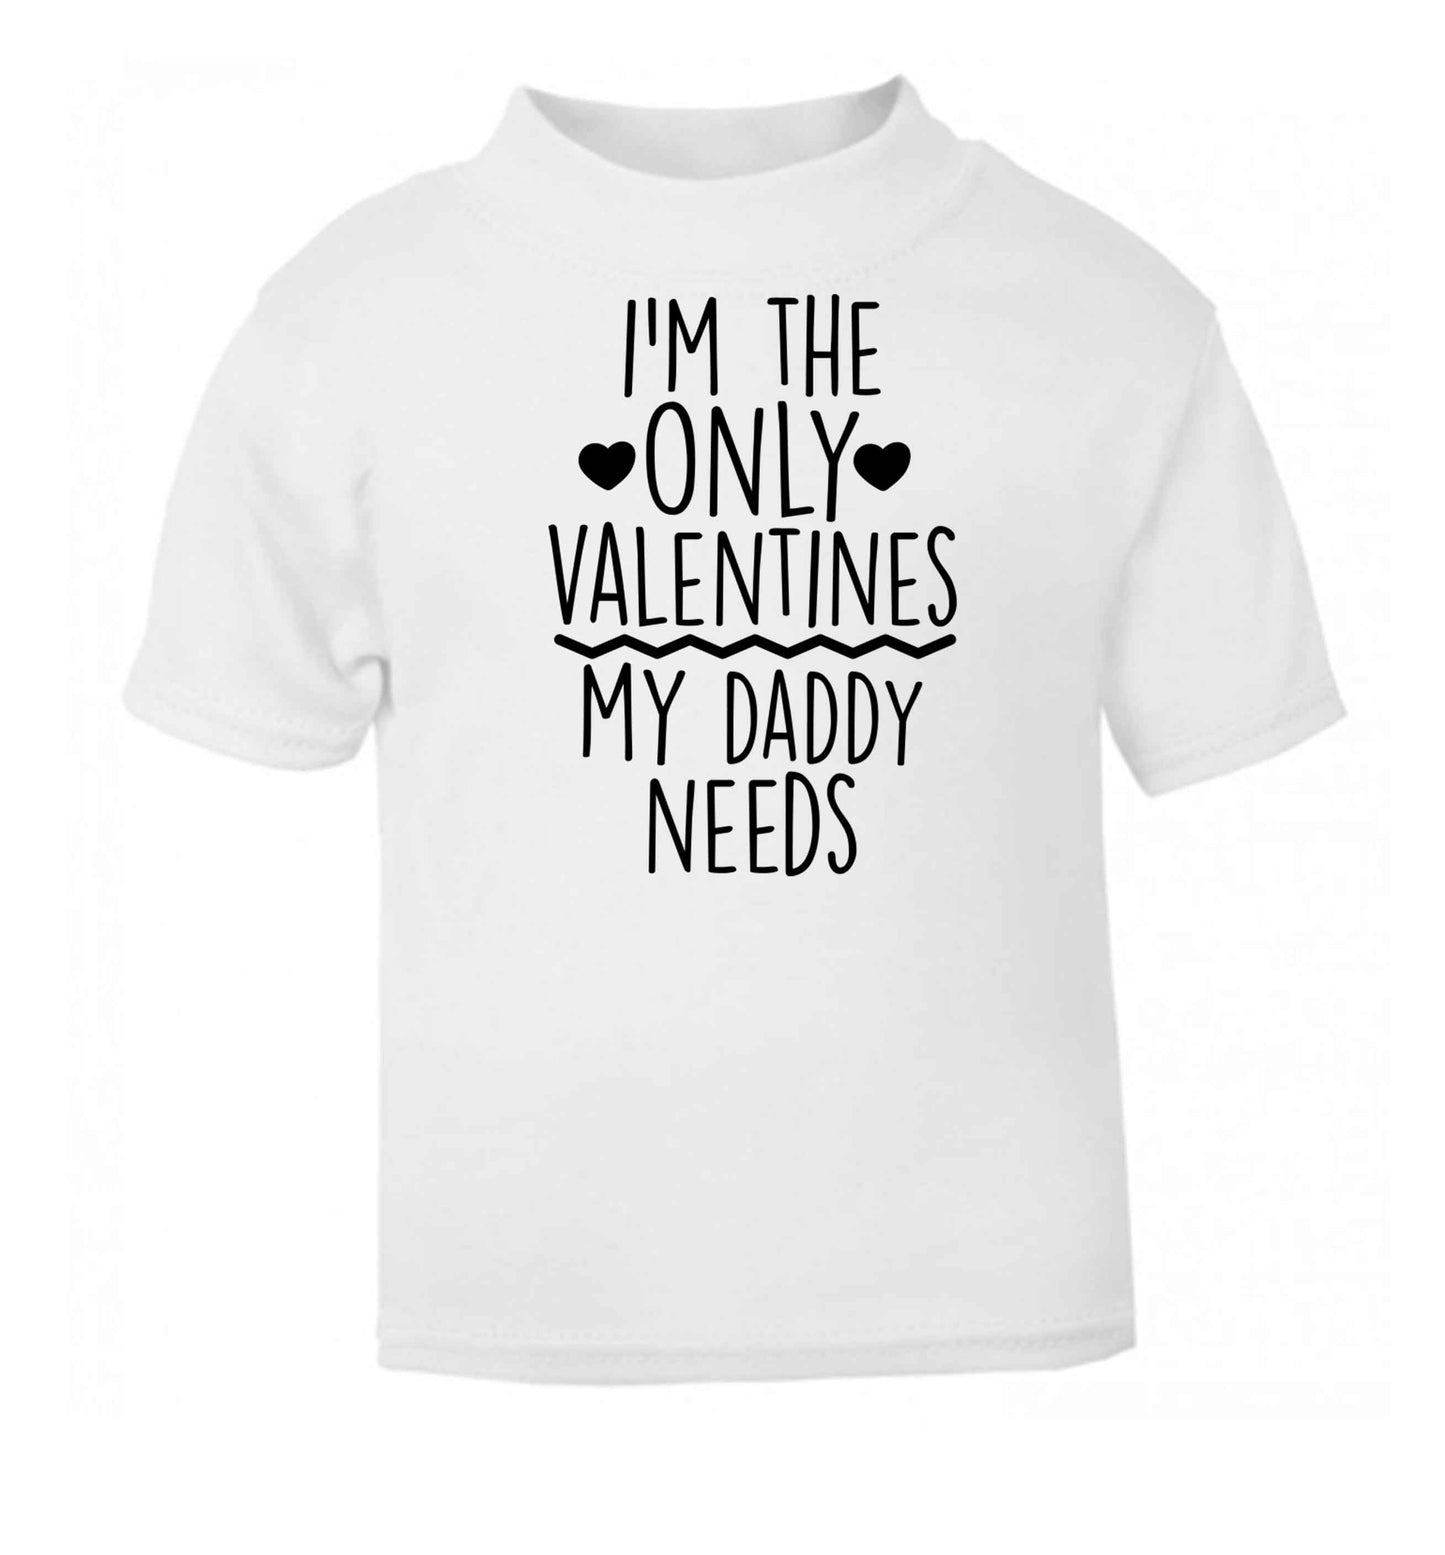 I'm the only valentines my daddy needs white baby toddler Tshirt 2 Years